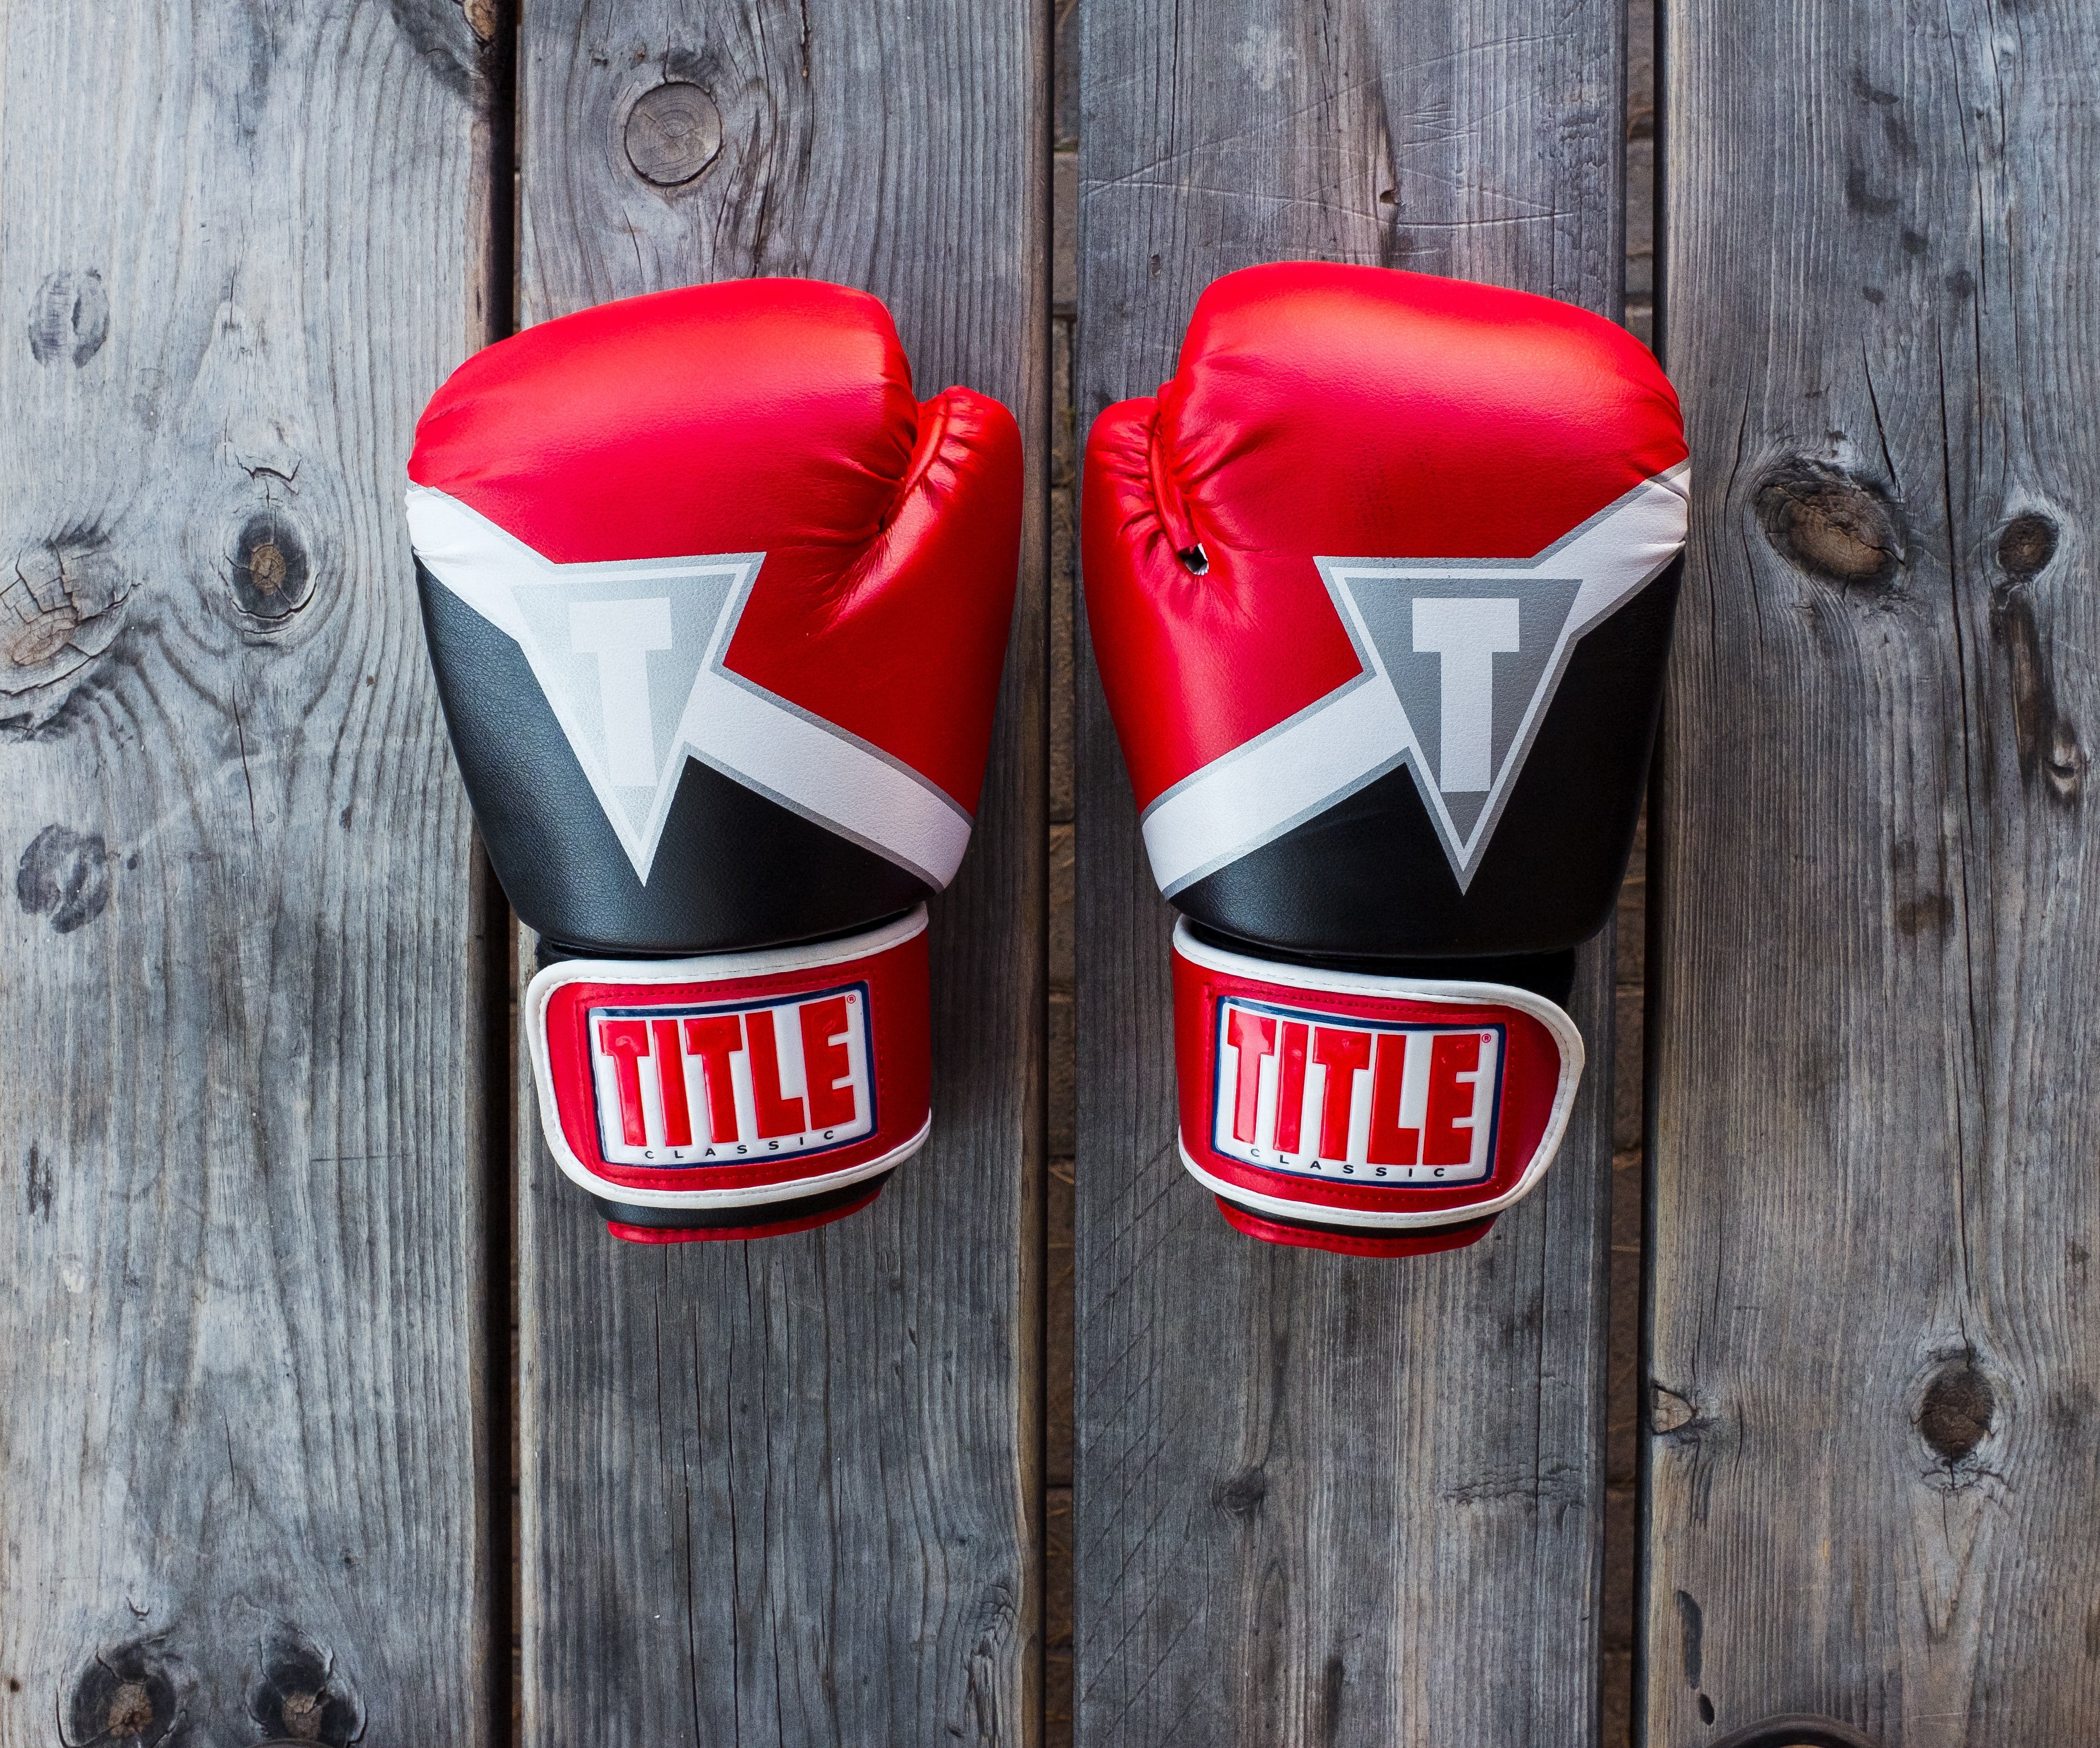 Pair of boxing gloves | Source: Unsplash / NeONBRAND